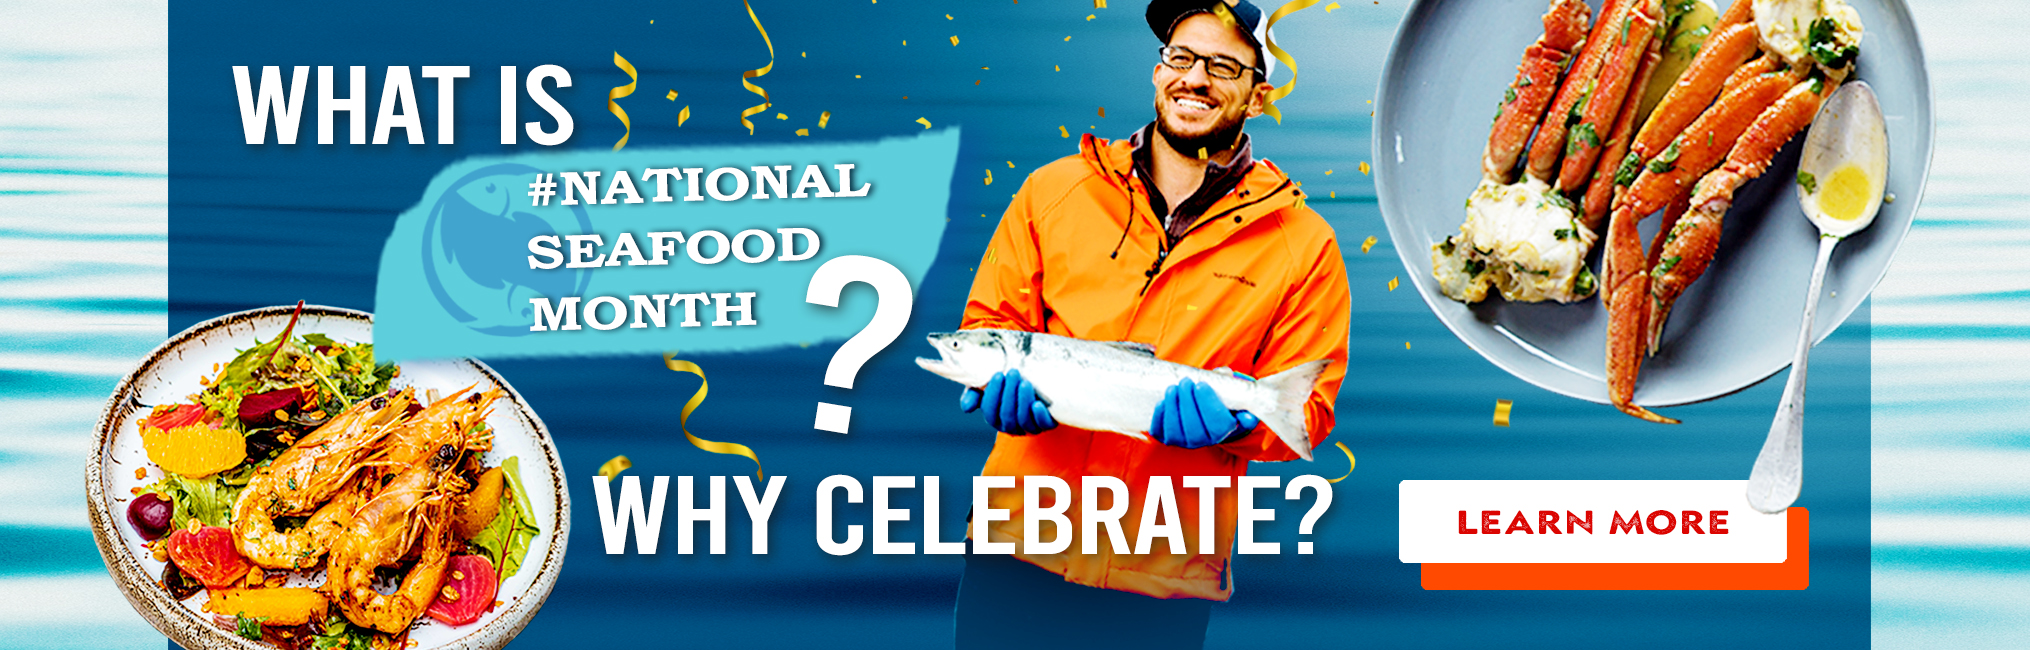 OCTOBER IS NATIONAL SEAFOOD MONTH